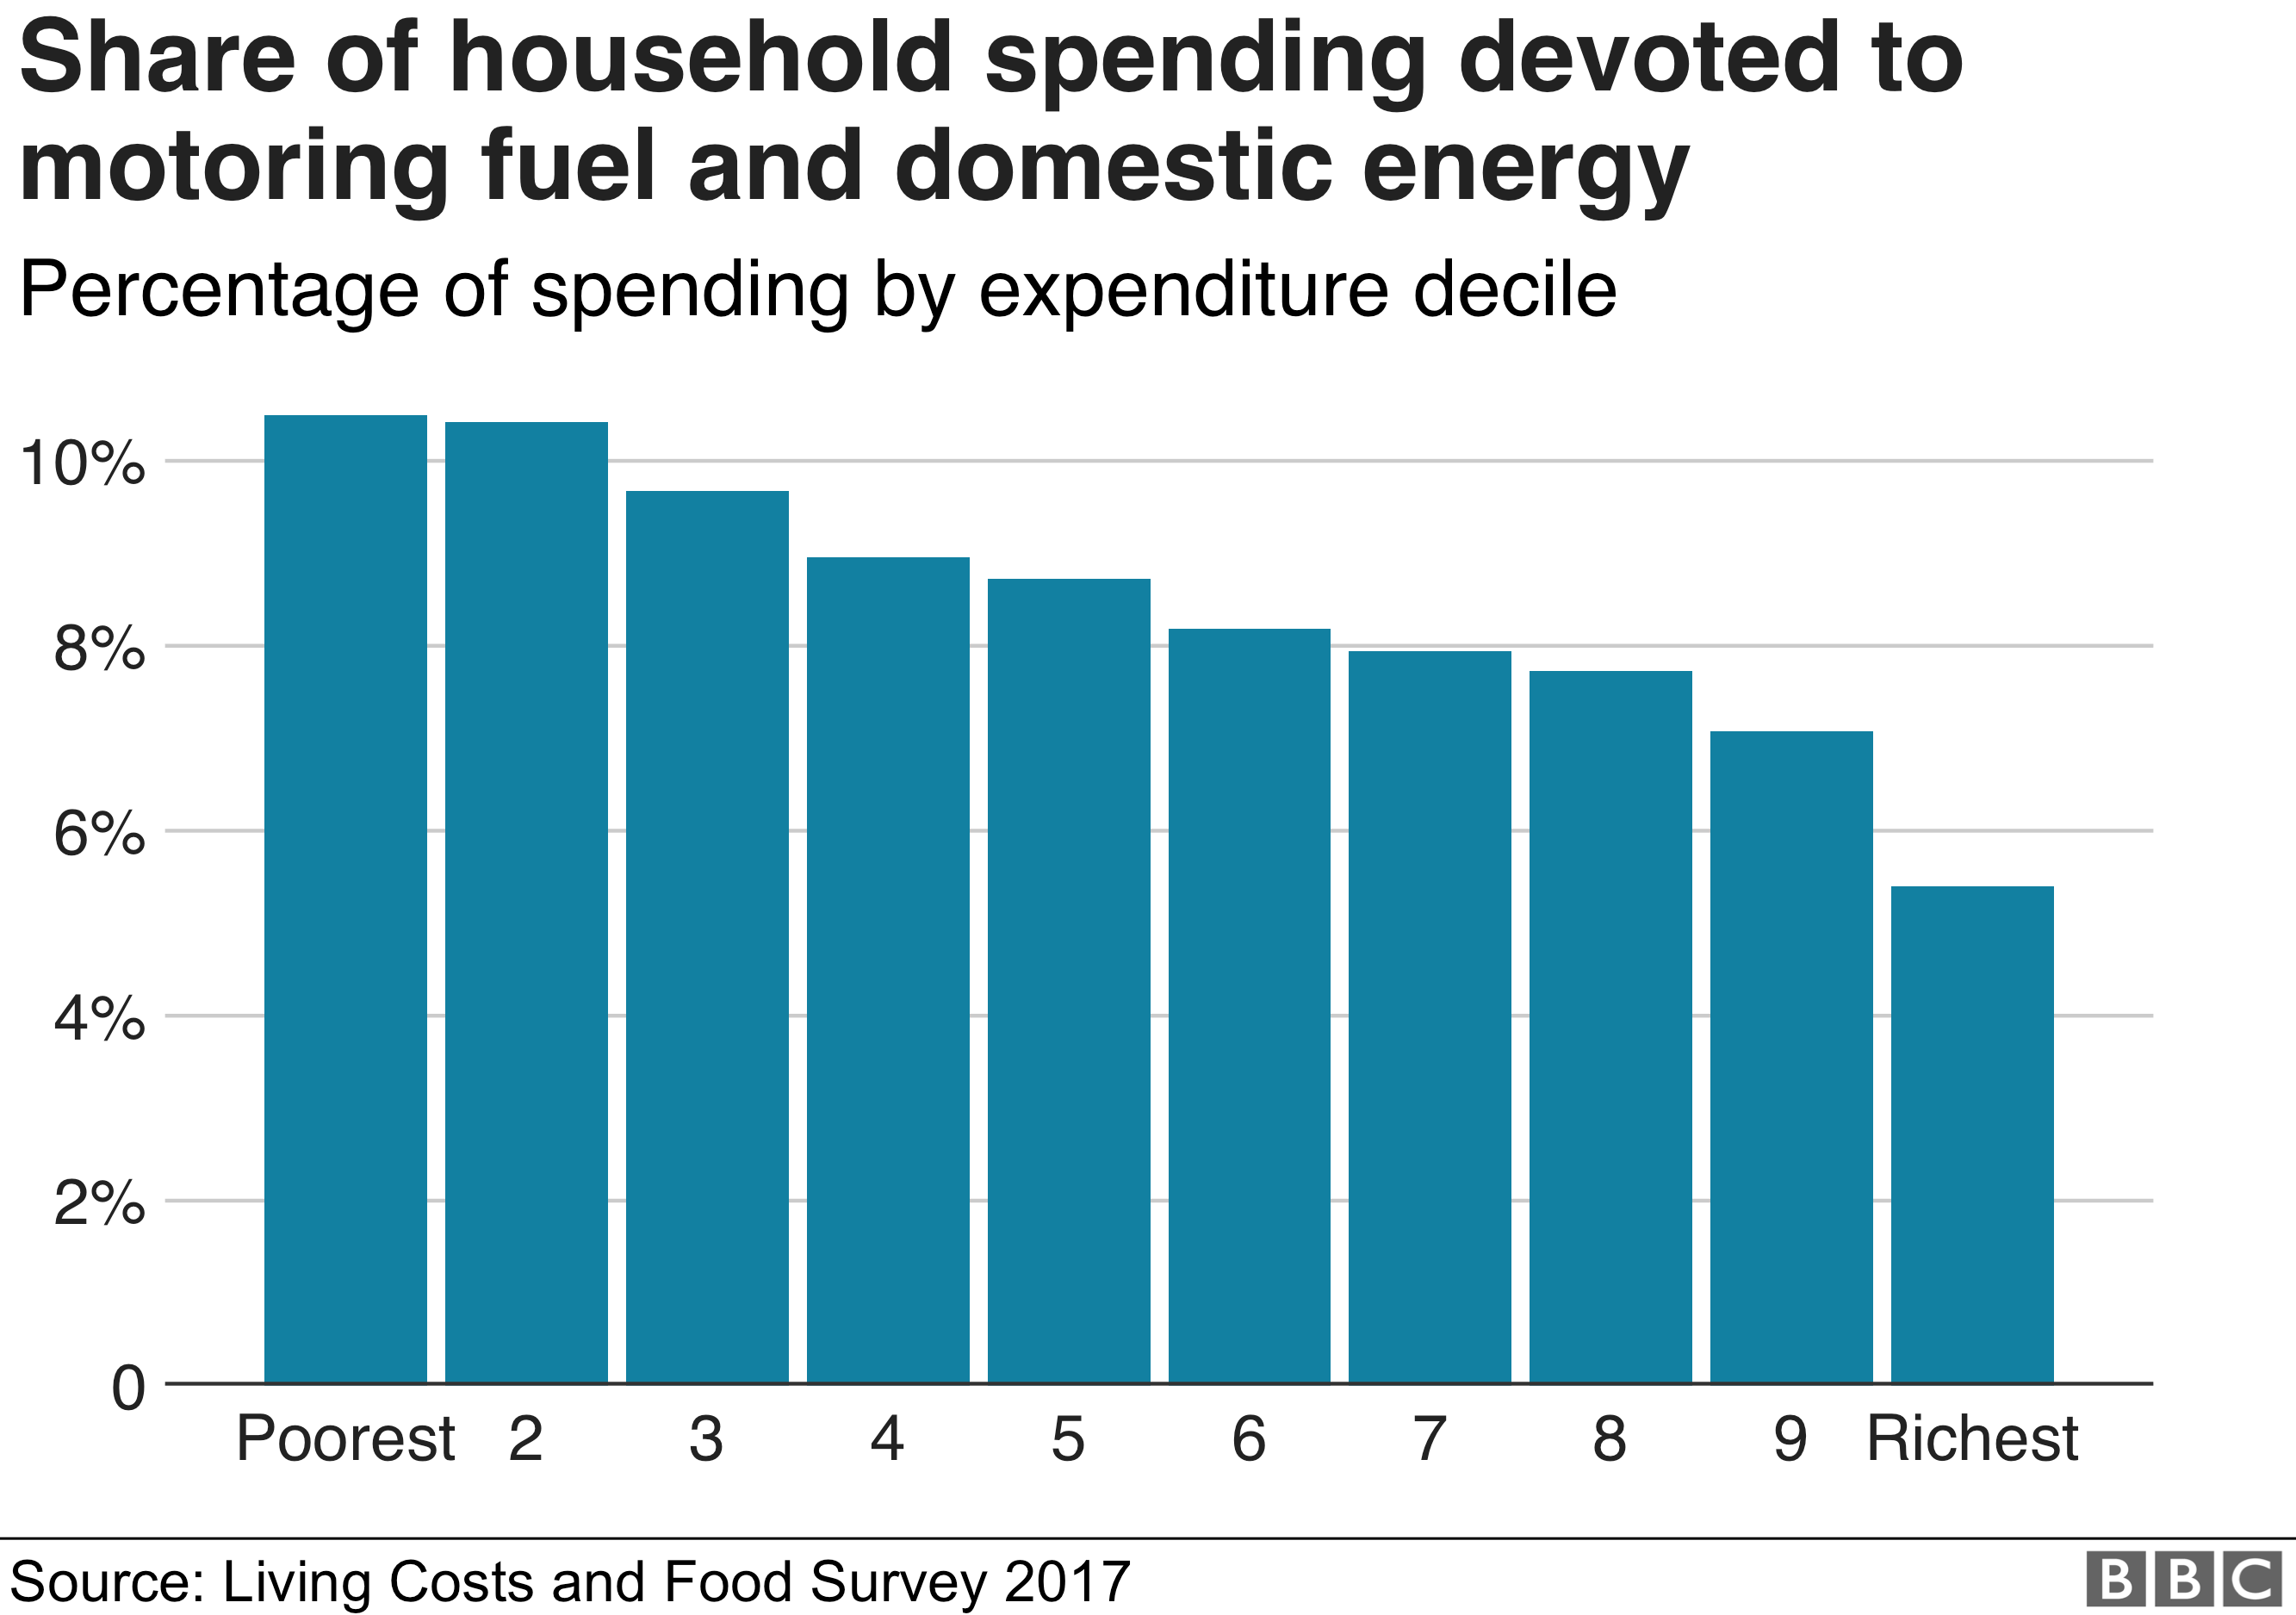 Share of household spending devoted to motoring fuel and domestic energy